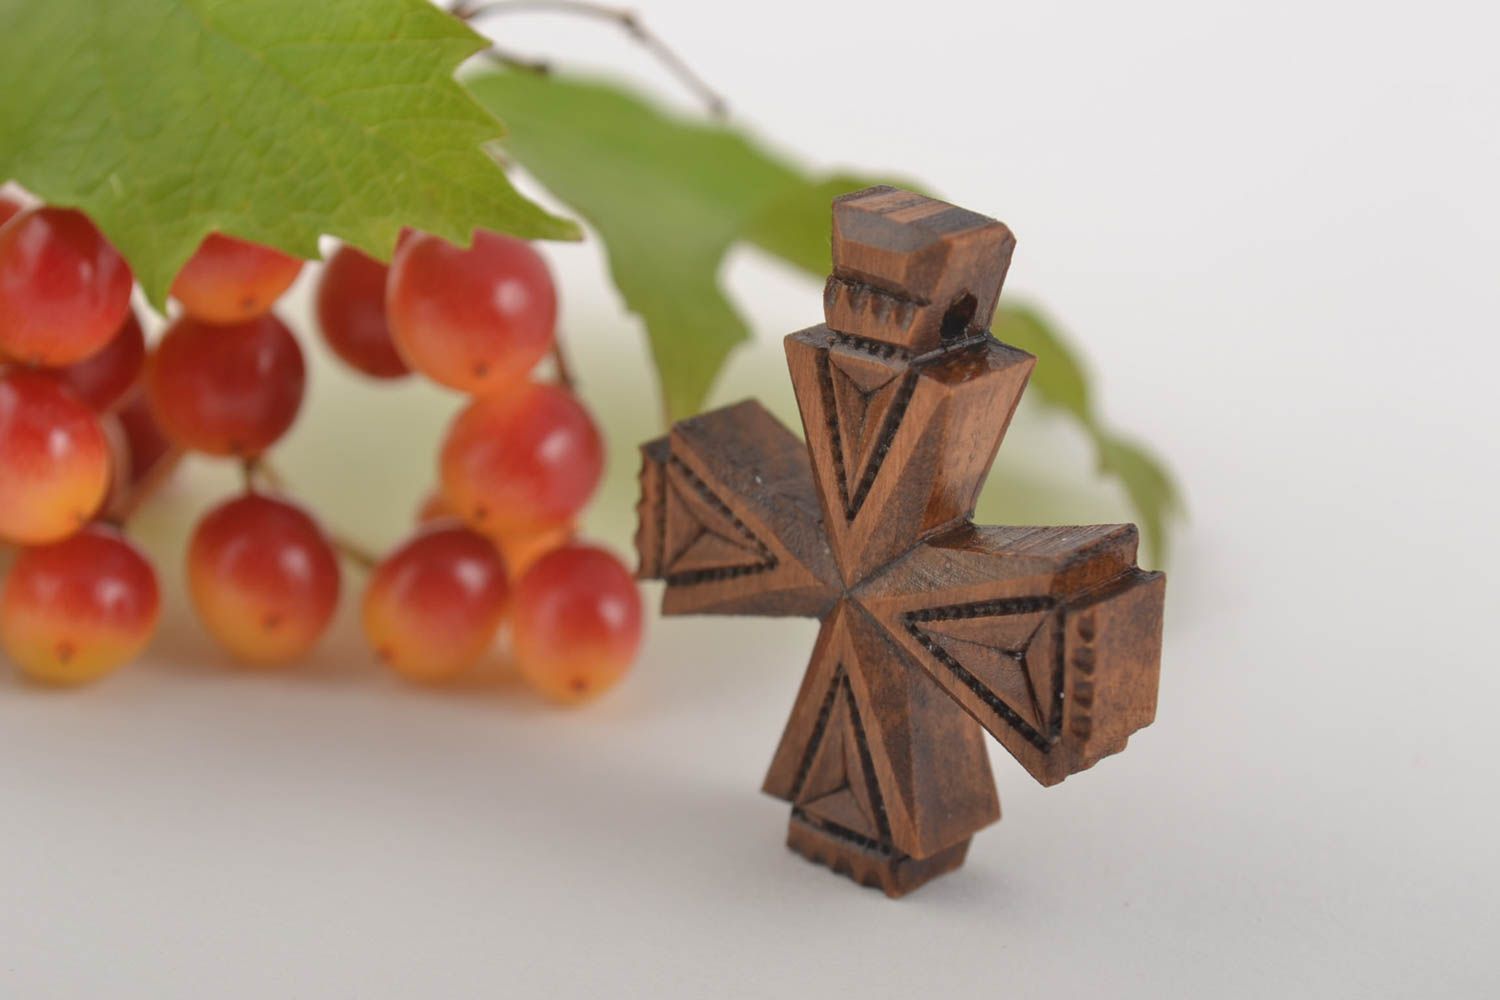 Homemade jewelery wooden cross necklace christening gifts wooden jewelry photo 1